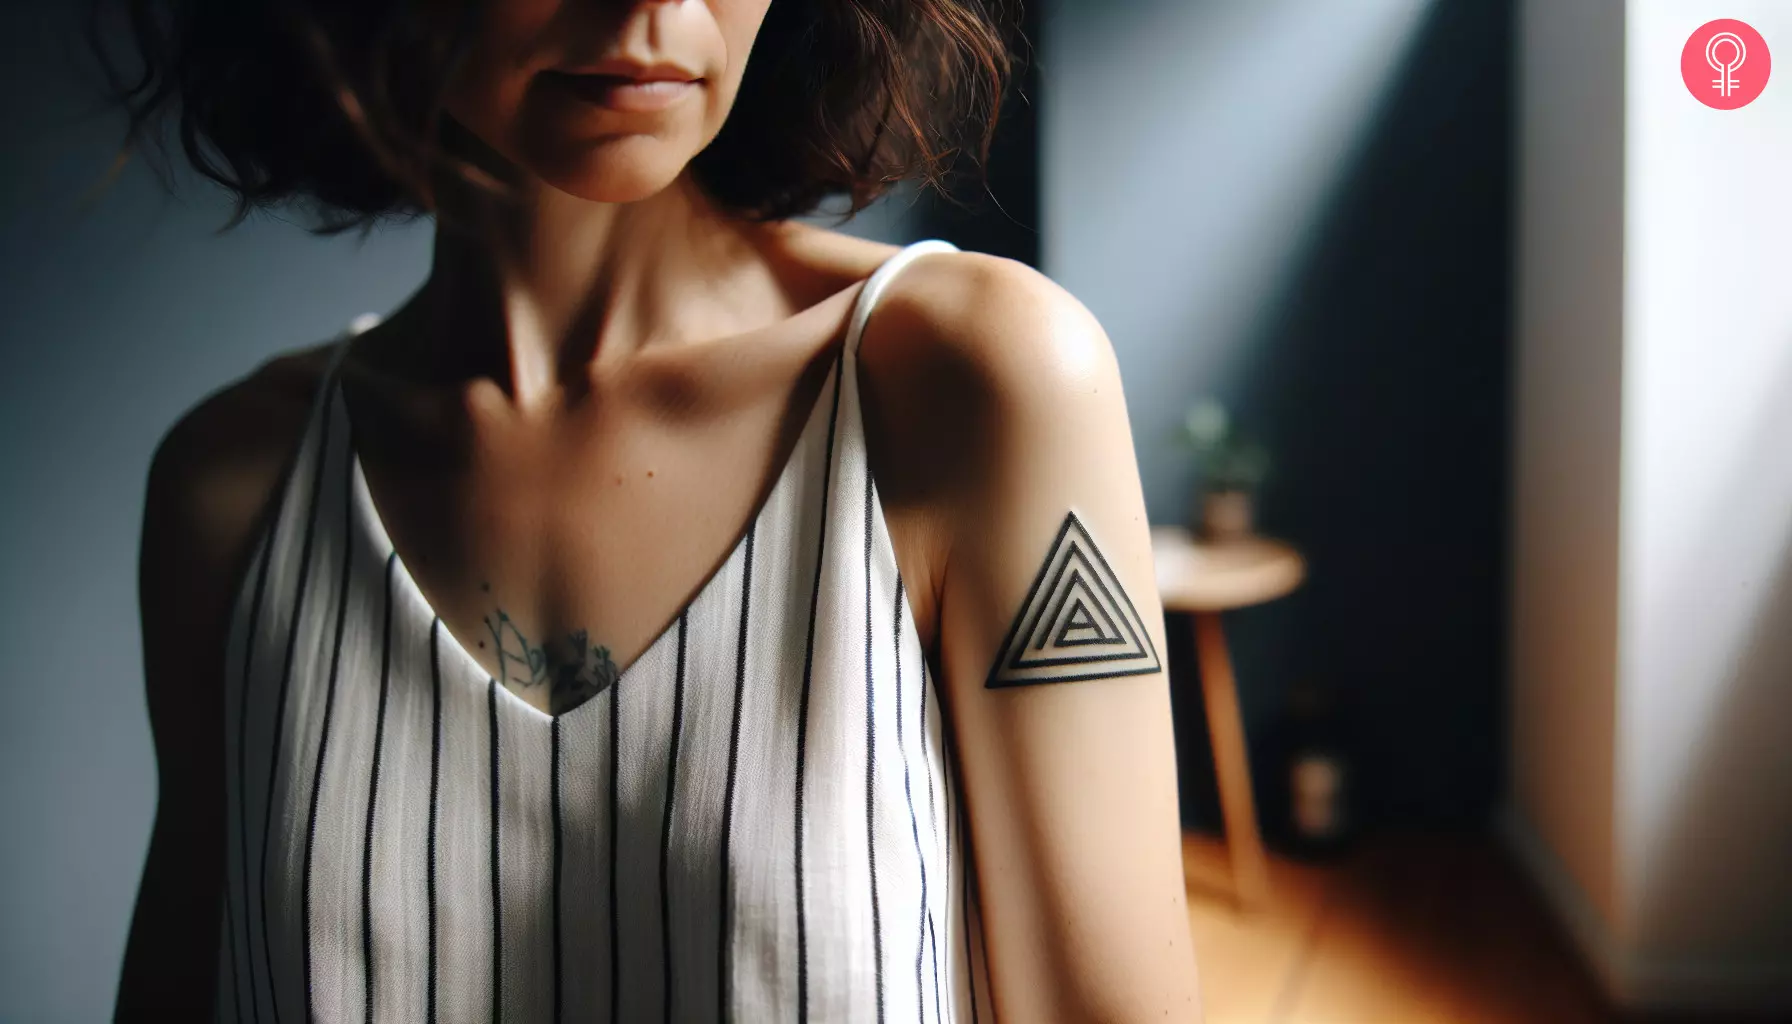 A woman with a tribal triangle tattoo on her upper arm